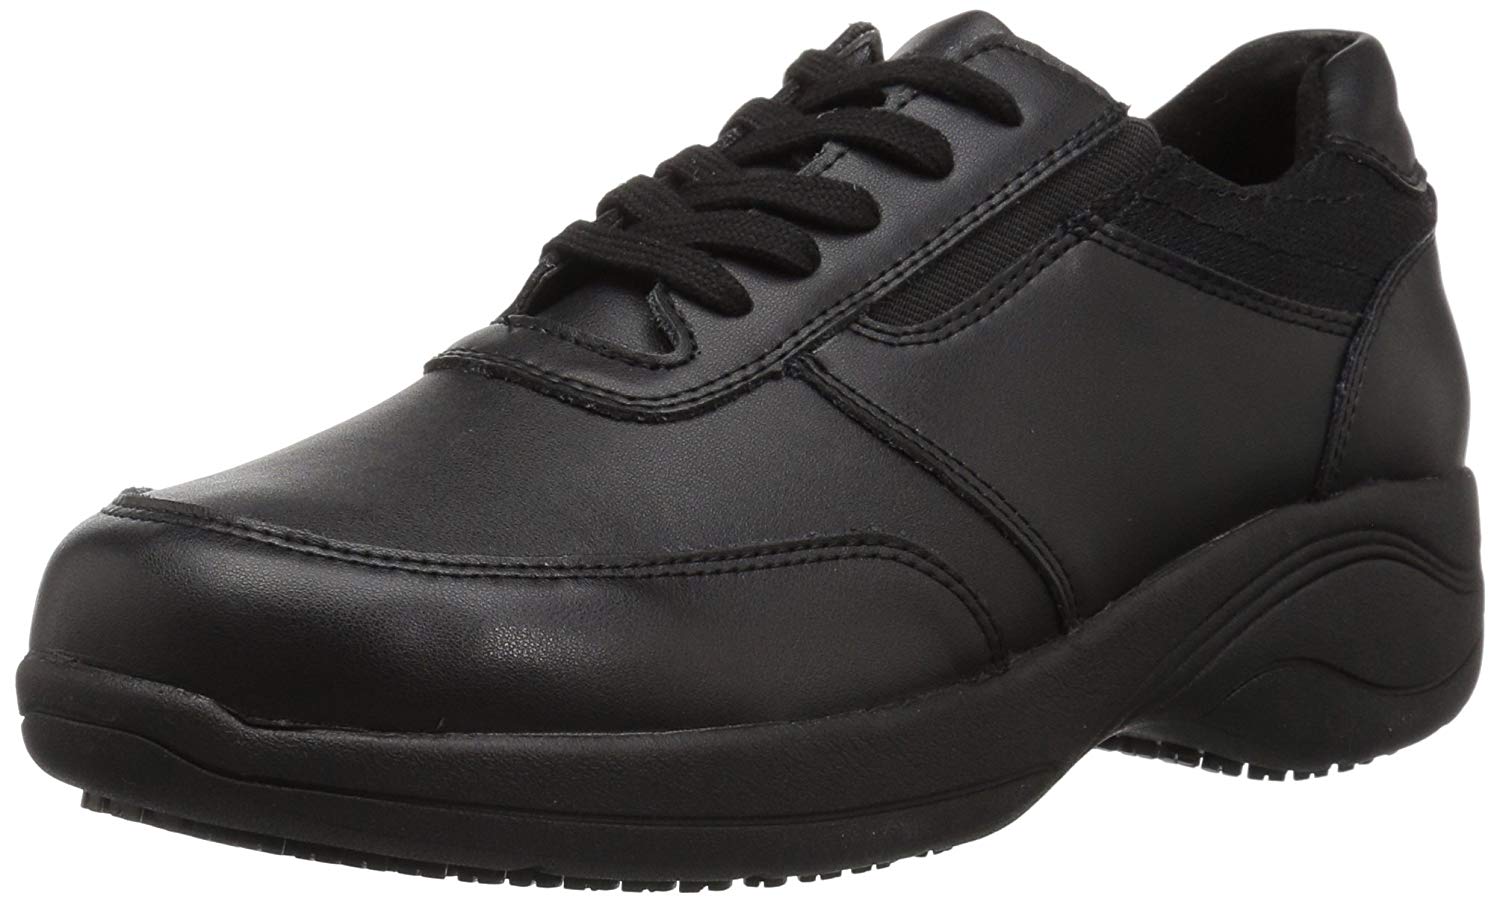 Easy Works Women's Middy Health Care Professional Shoe, Black/Mesh ...